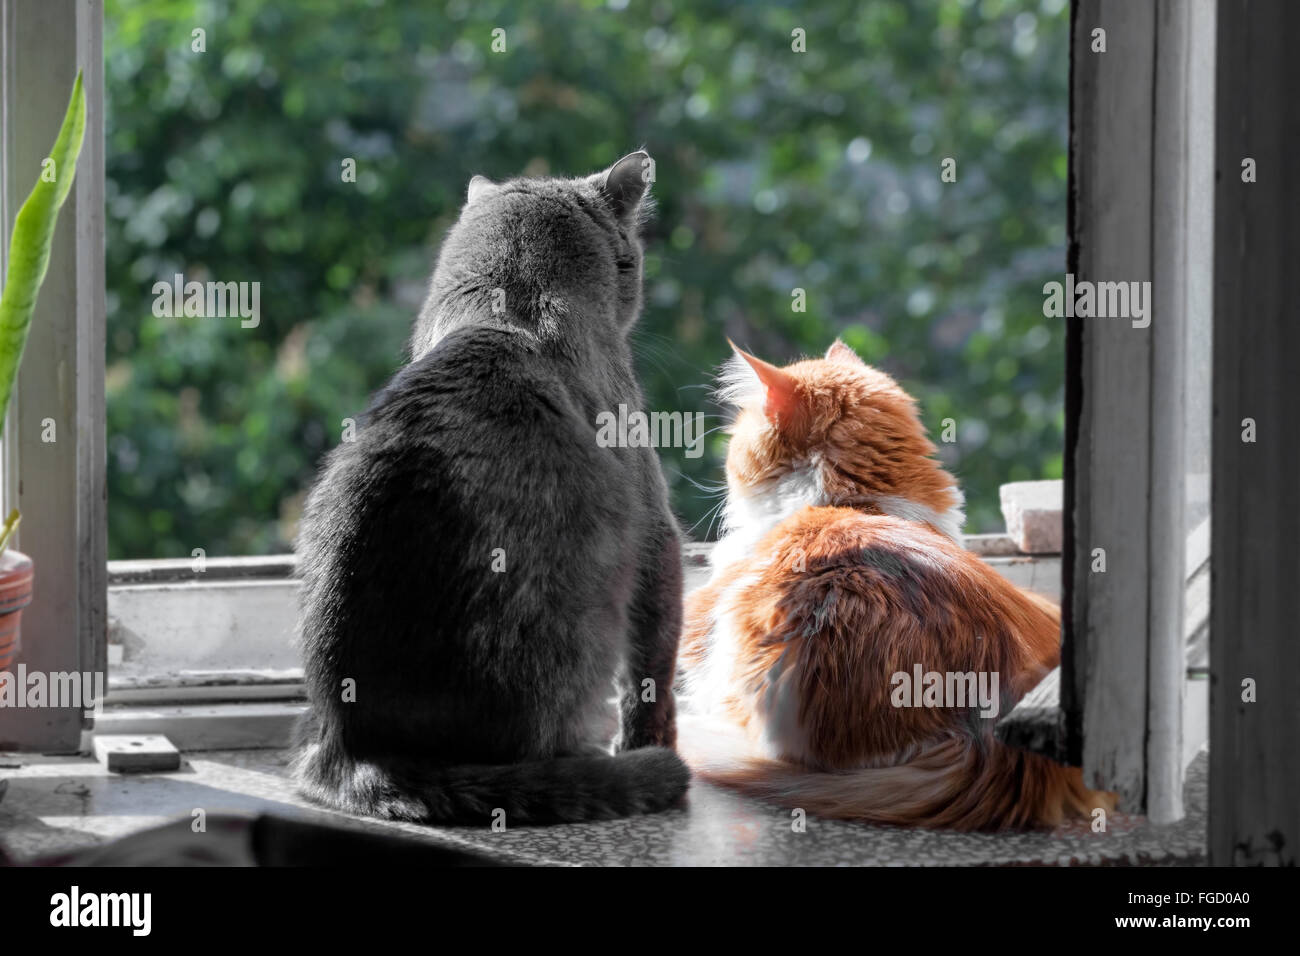 Big grey and red cats on window at sunny day Stock Photo